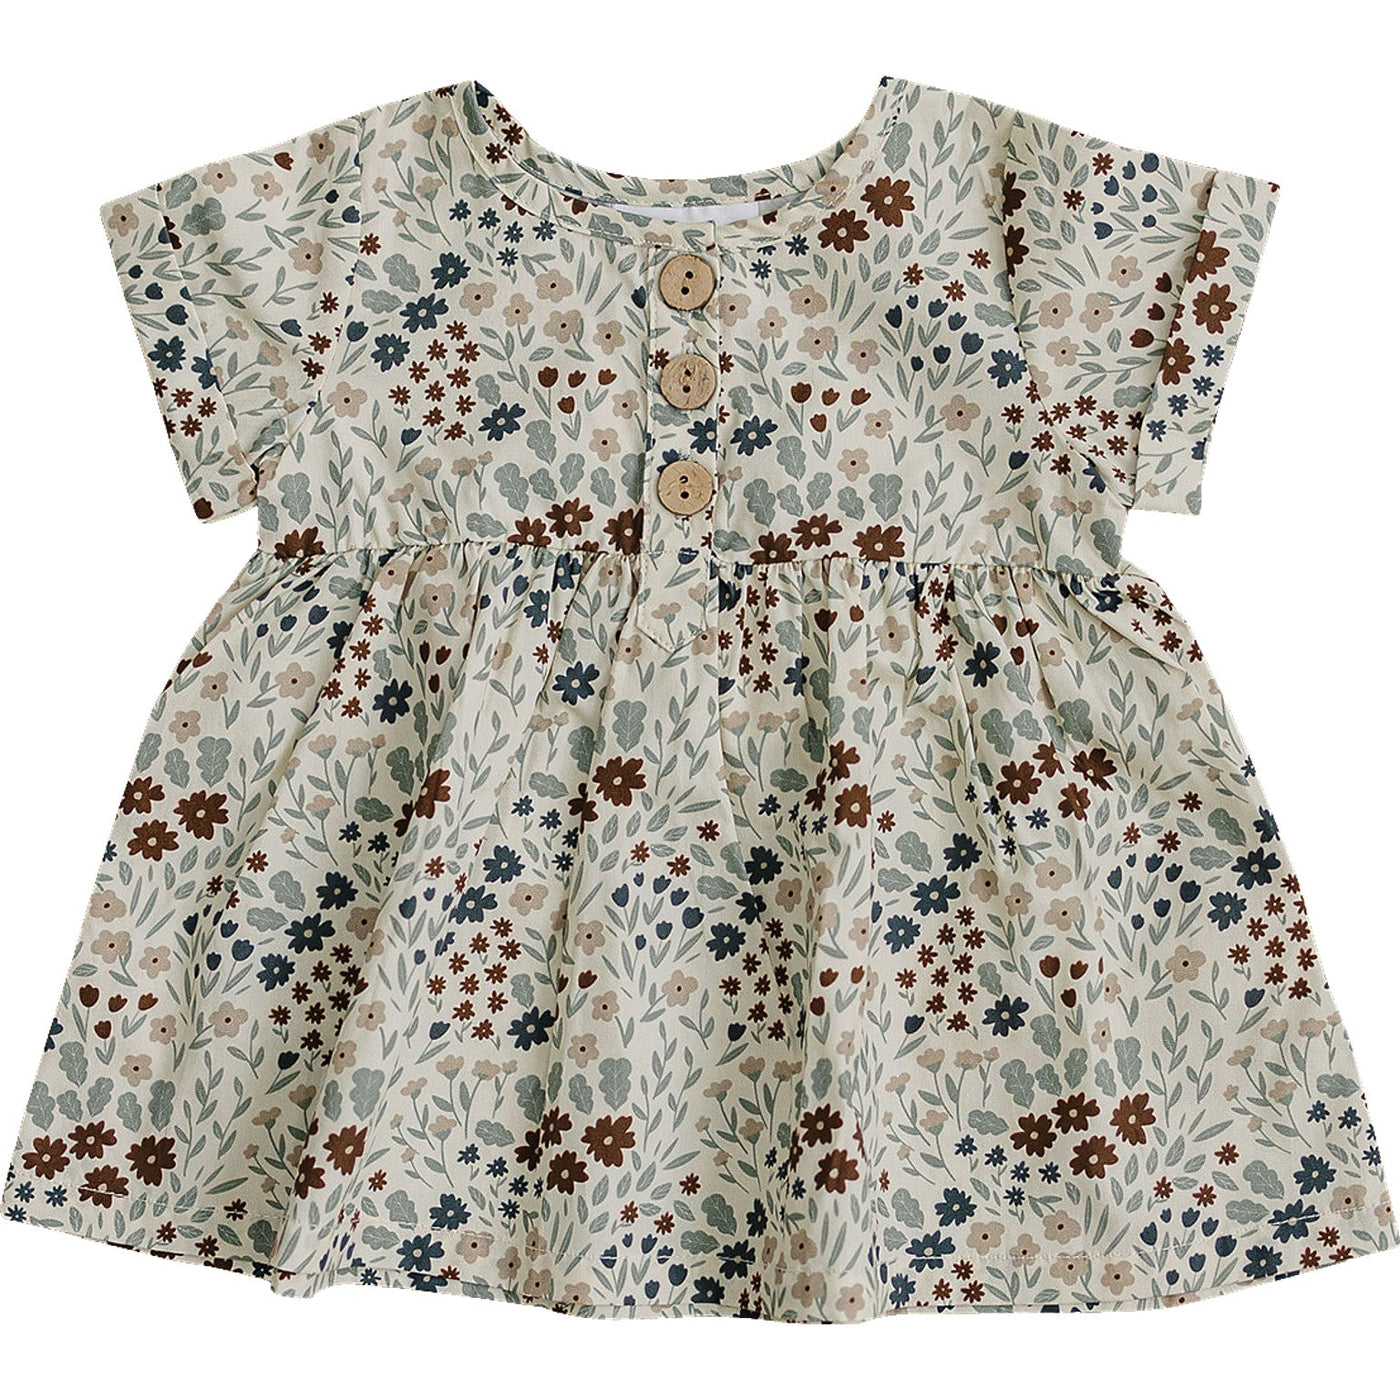 a baby dress with flowers on it